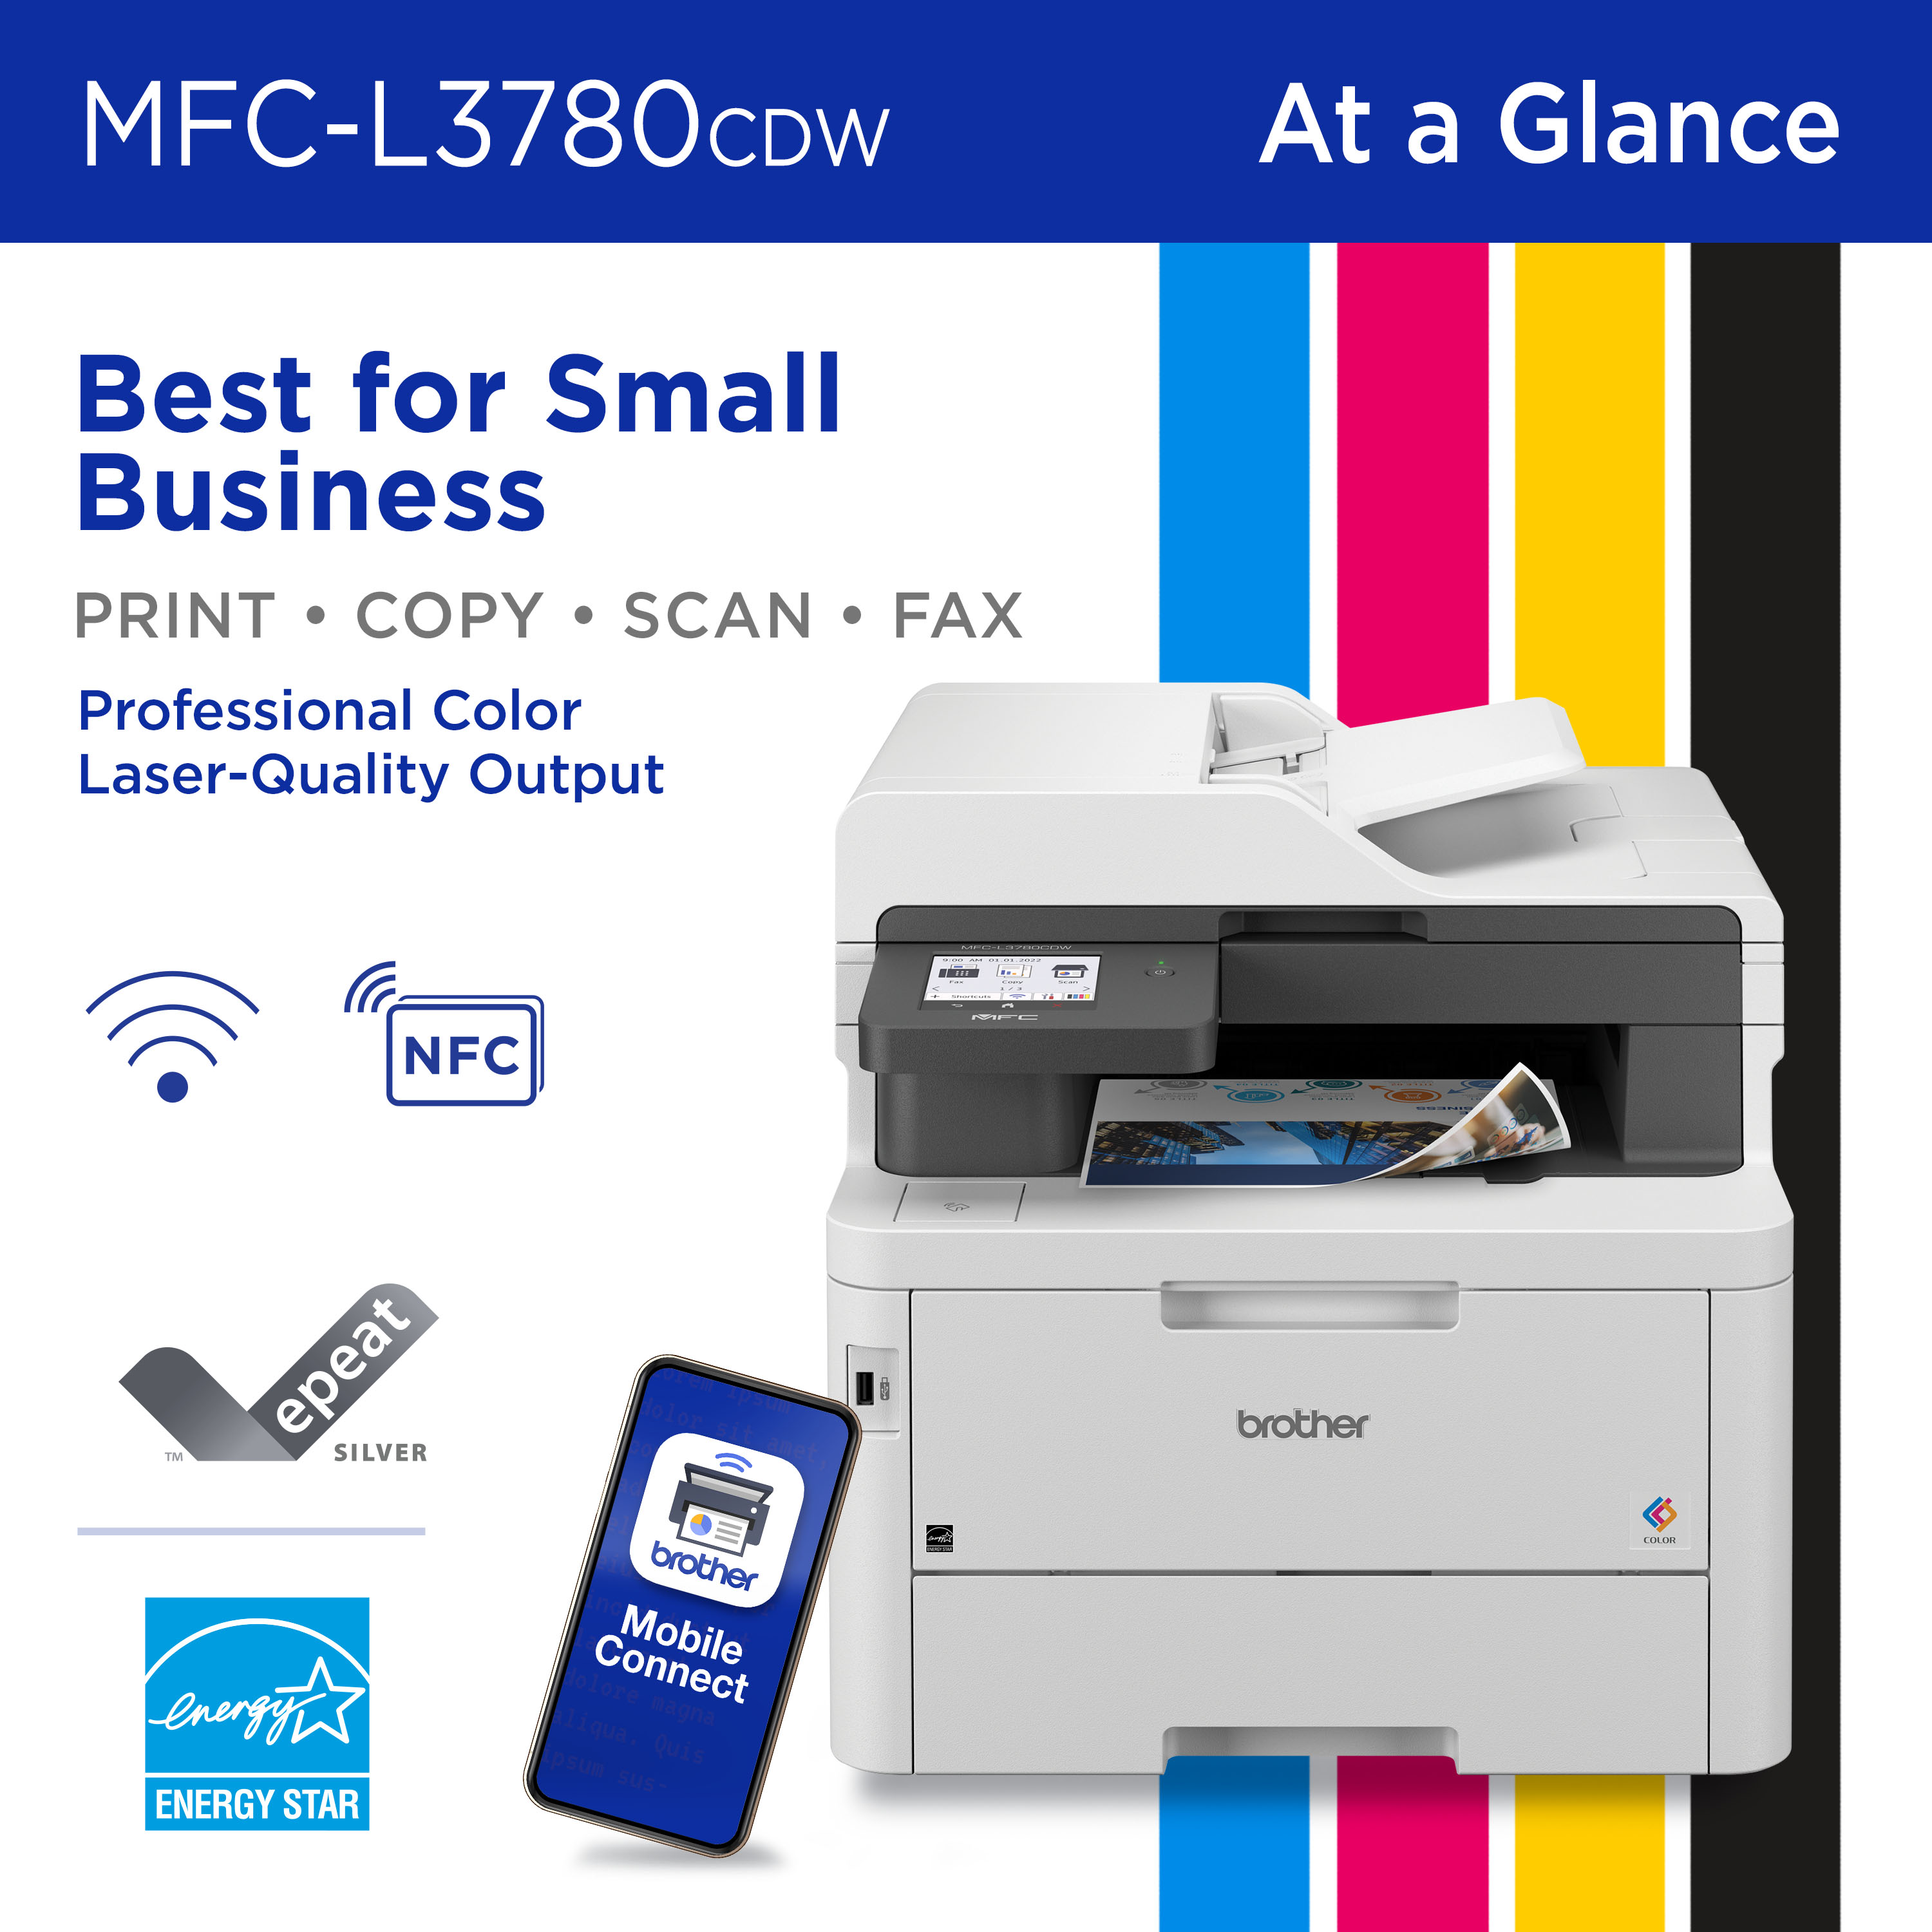 Digital Color All-in-One Printer with Laser Quality, Copy, Scan, and Fax,  Single Pass Duplex Copy and Scan, Duplex and Mobile Printing, Gigabit 